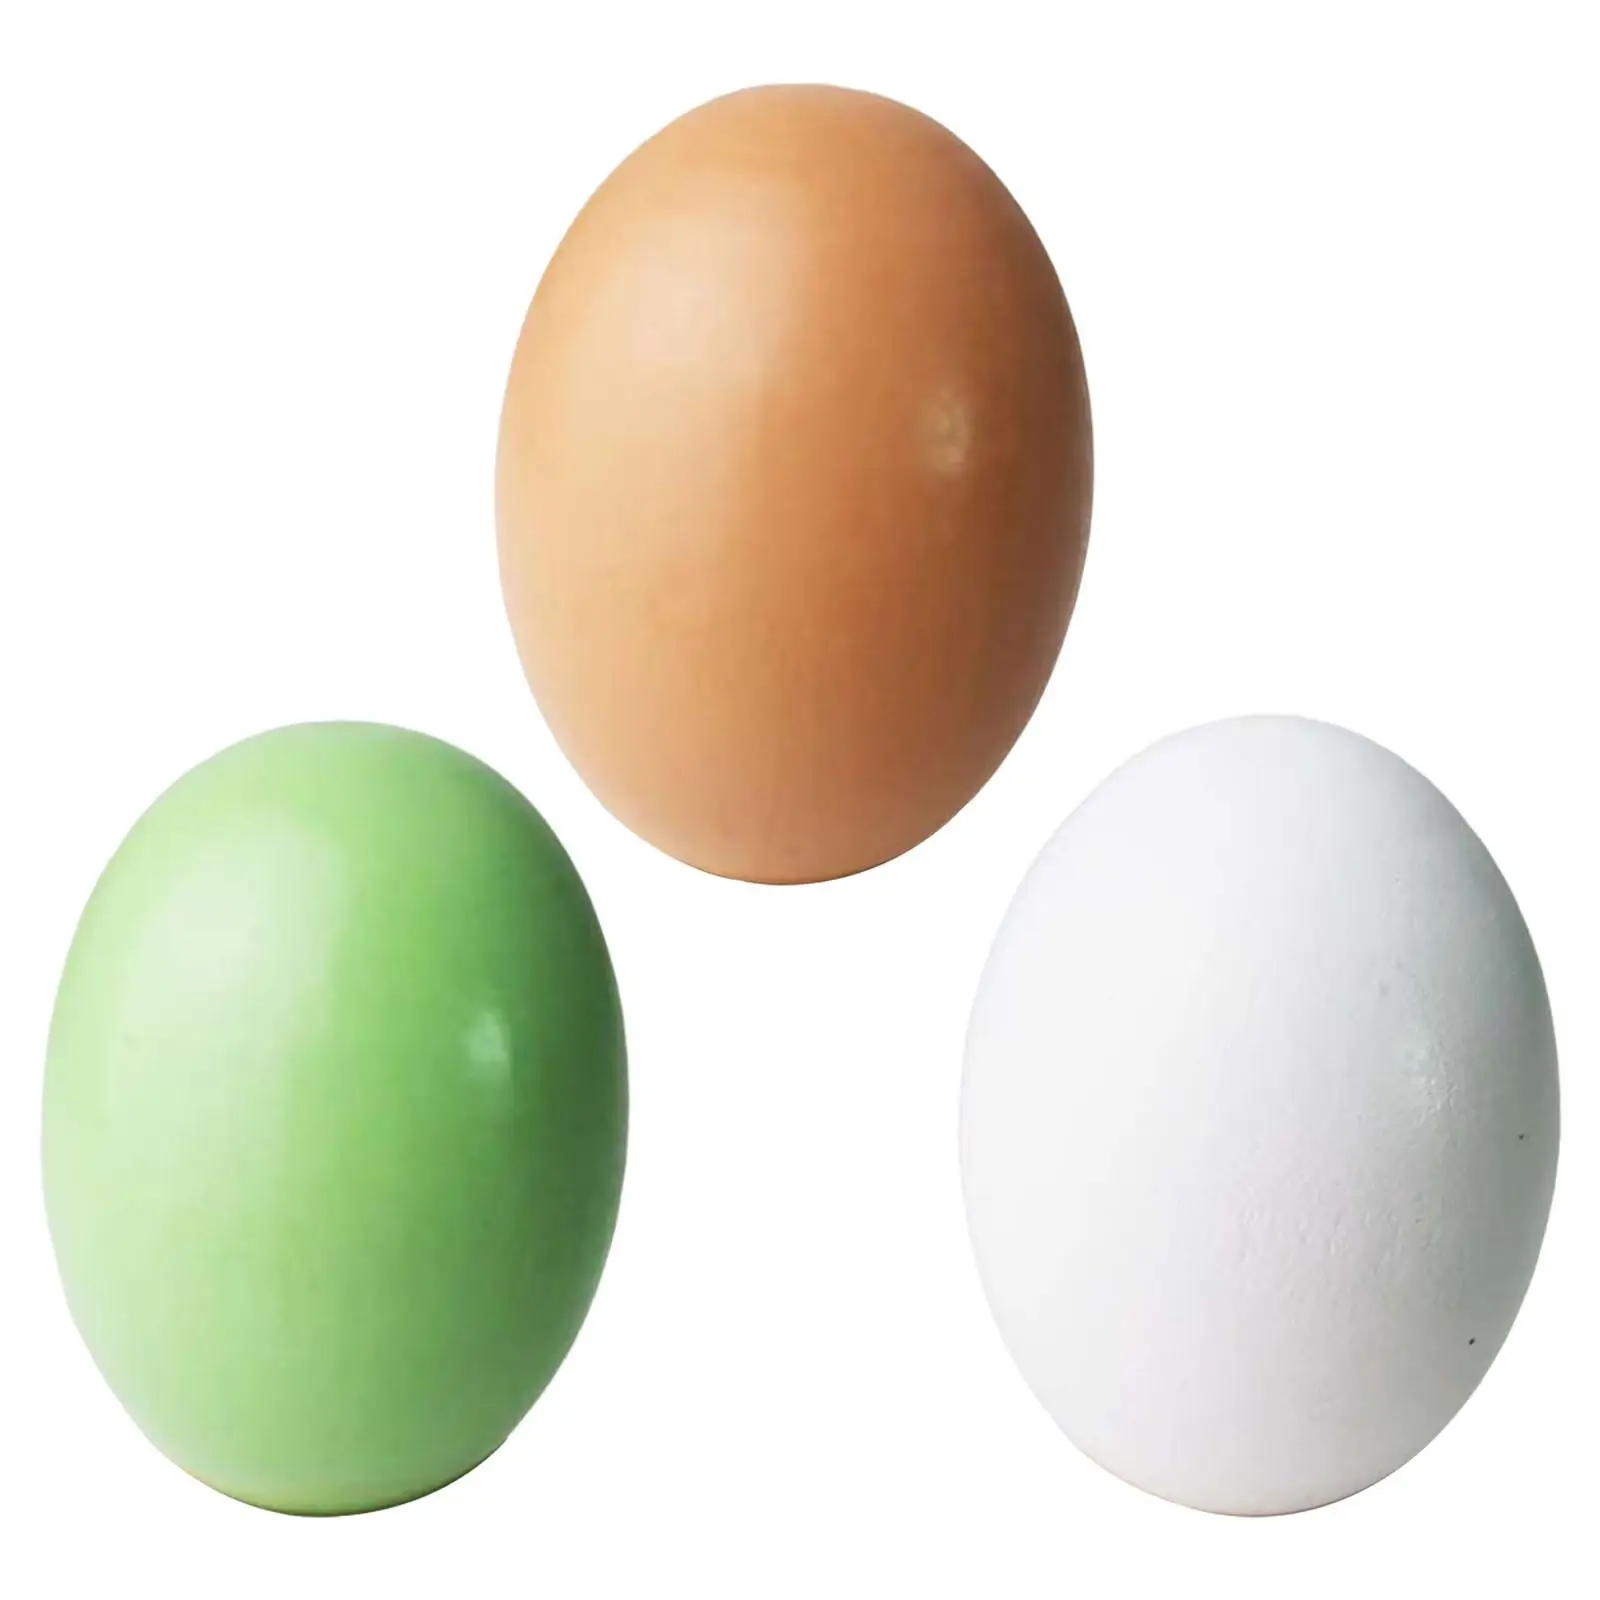 3Pcs Wooden Simulation Eggs Decoration Educational Toy Gifts Multipurpose Model